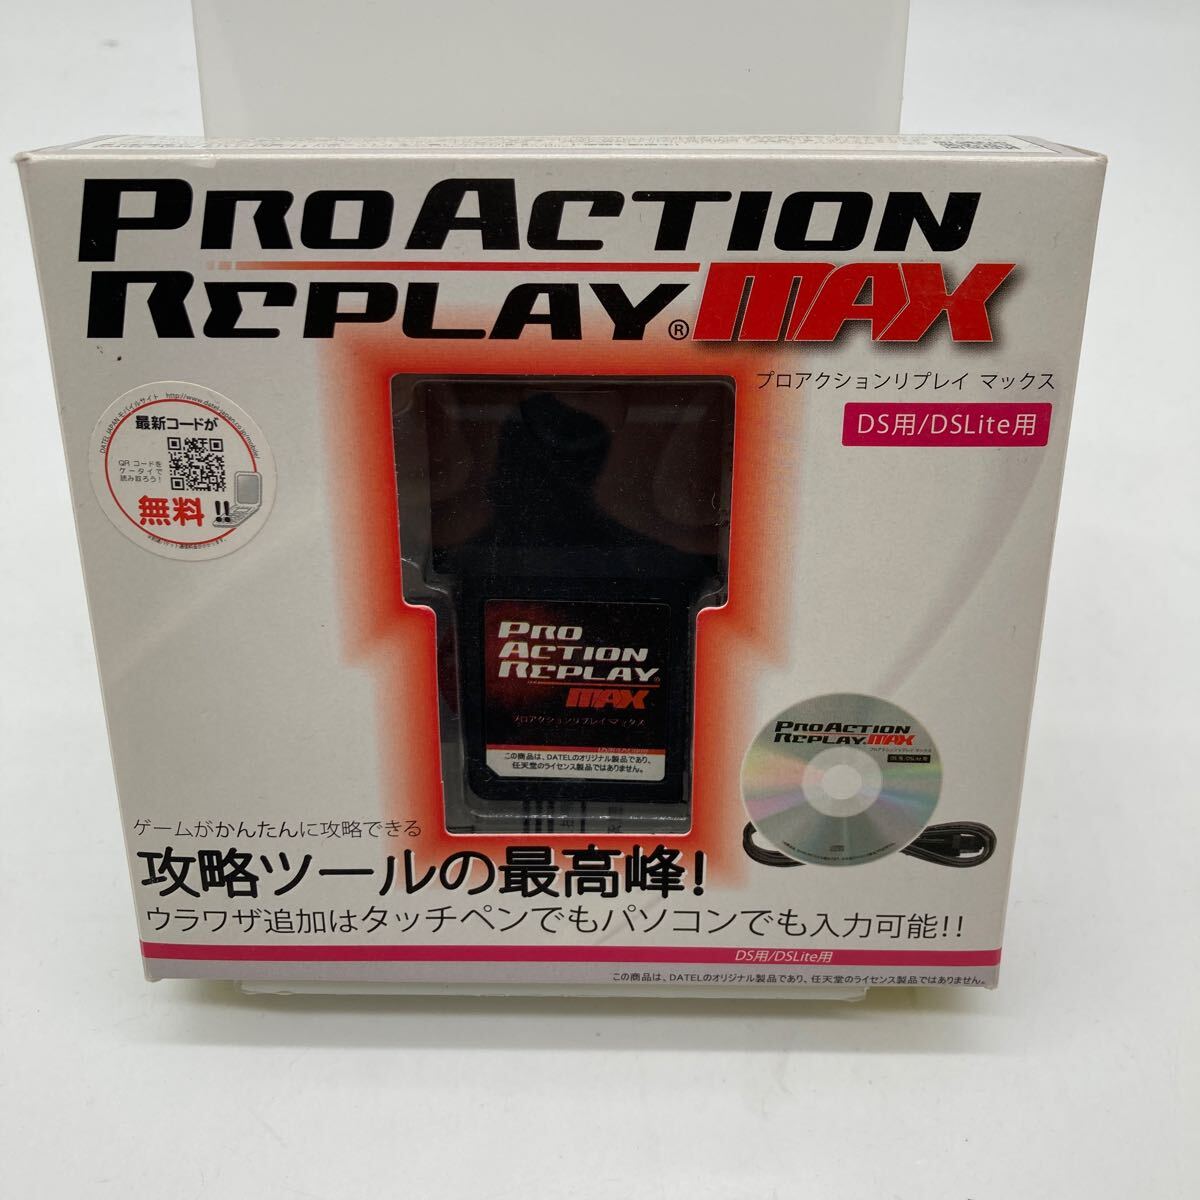 0513 Pro action li Play MAX DS/DSLite for ya60 t26